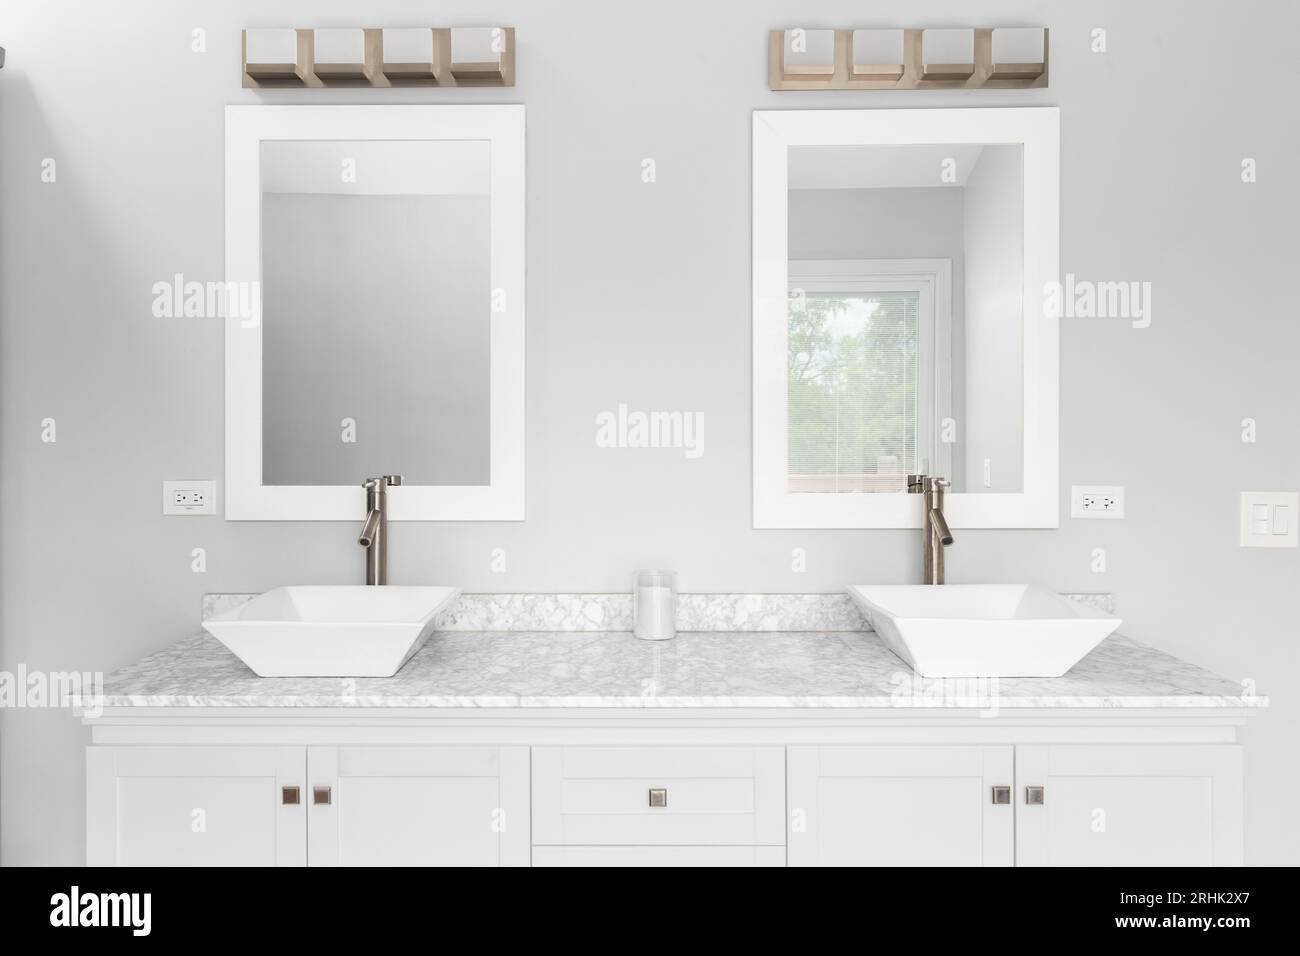 A bathroom detail with a white cabinet, two vessel sinks, marble countertop, and a bronze light fixture mounted above white framed mirrors. Stock Photo